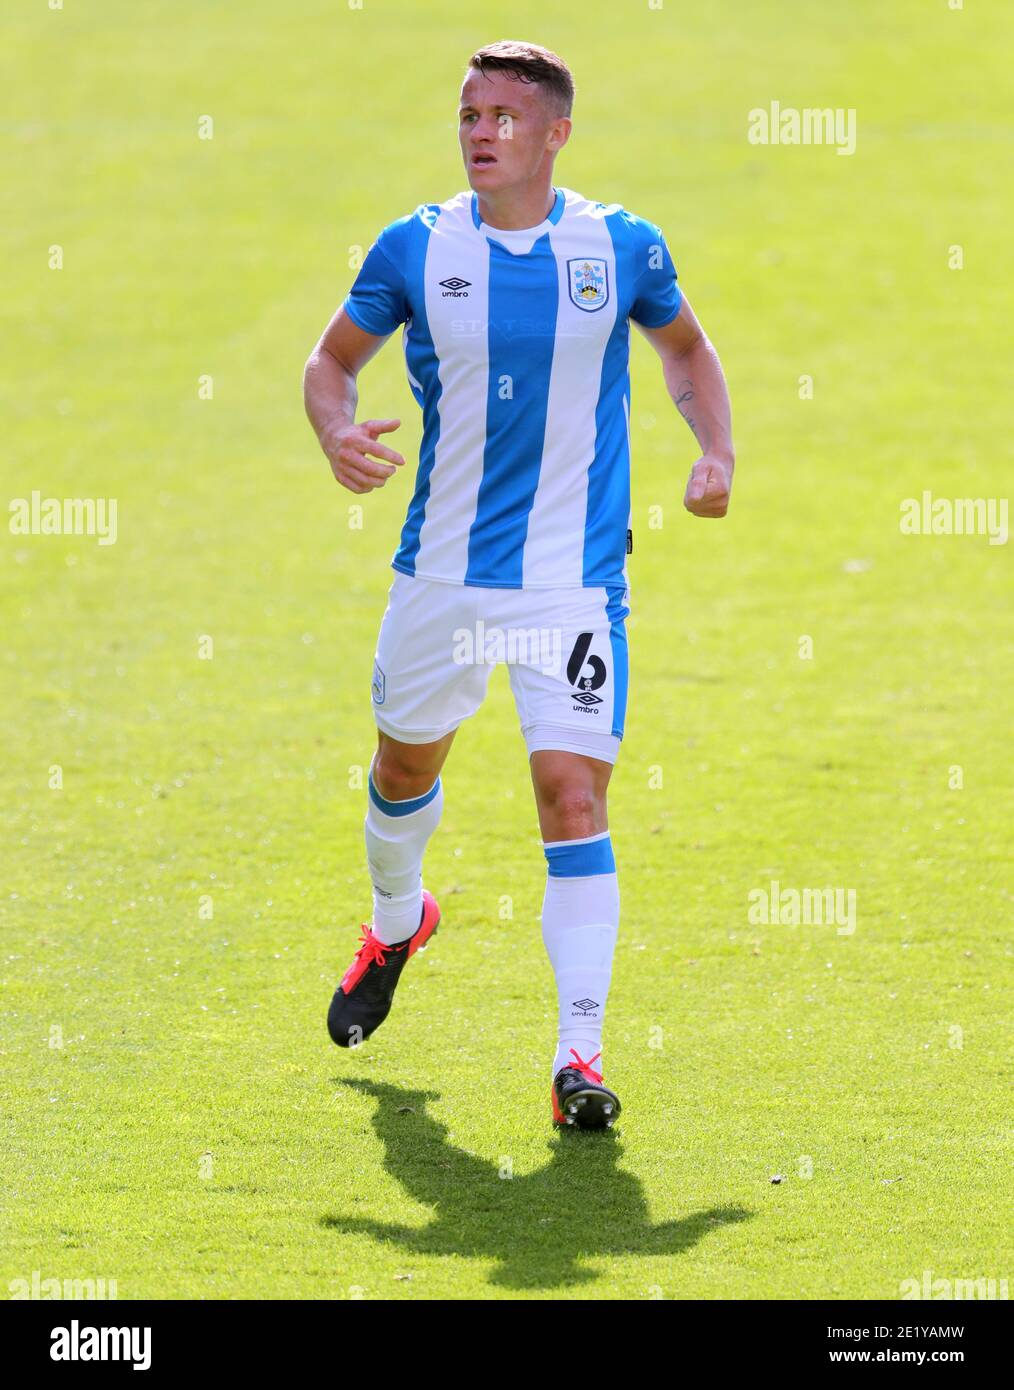 Huddersfield Town's Jonathan Hogg during the Sky Bet Championship match at the John Smith's Stadium, Huddersfield. Picture date: Saturday September 12, 2020. See PA story SOCCER Huddersfield. Photo credit should read: Richard Sellers/PA Wire. EDITORIAL USE ONLY No use with unauthorised audio, video, data, fixture lists, club/league logos or 'live' services. Online in-match use limited to 120 images, no video emulation. No use in betting, games or single club/league/player publications. Stock Photo